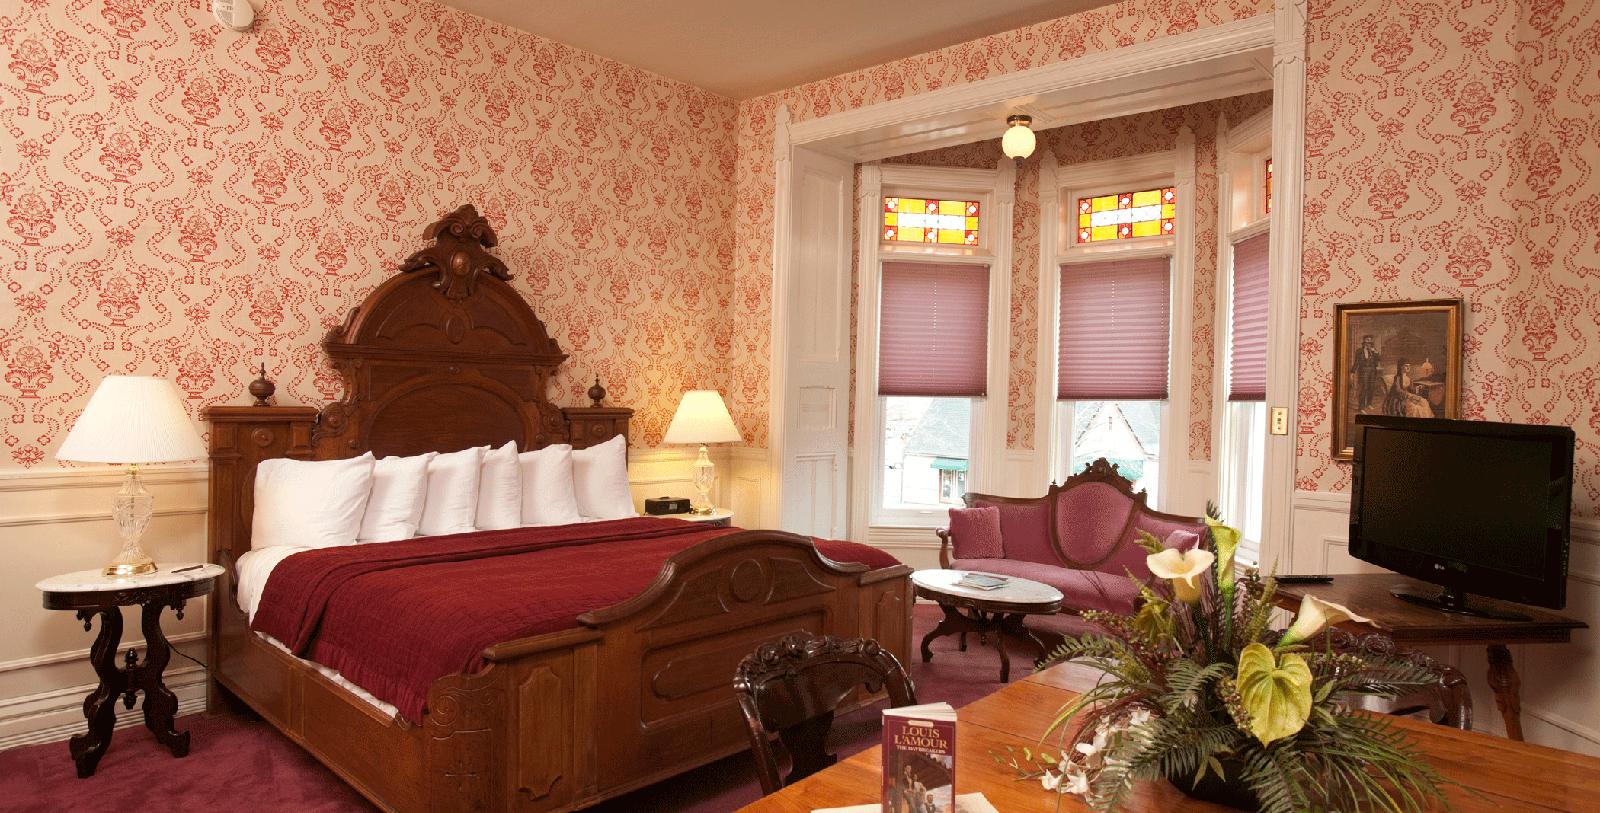 Image of Guestroom at The Strater Hotel, 1887, Member of Historic Hotels of America, in Durango, Colorado, Accommodations